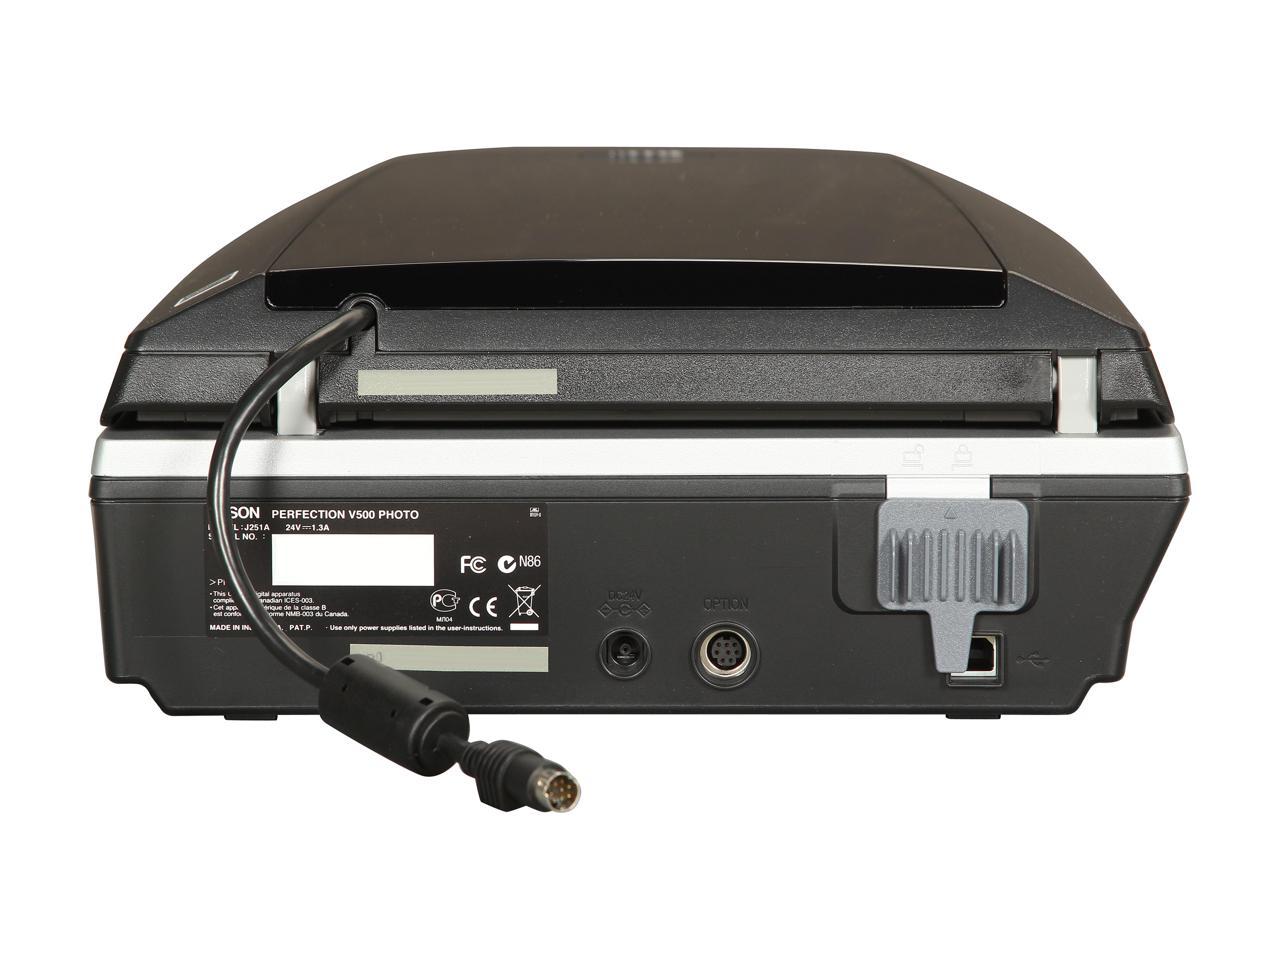 epson perfection v500 photo flatbed scanner prices